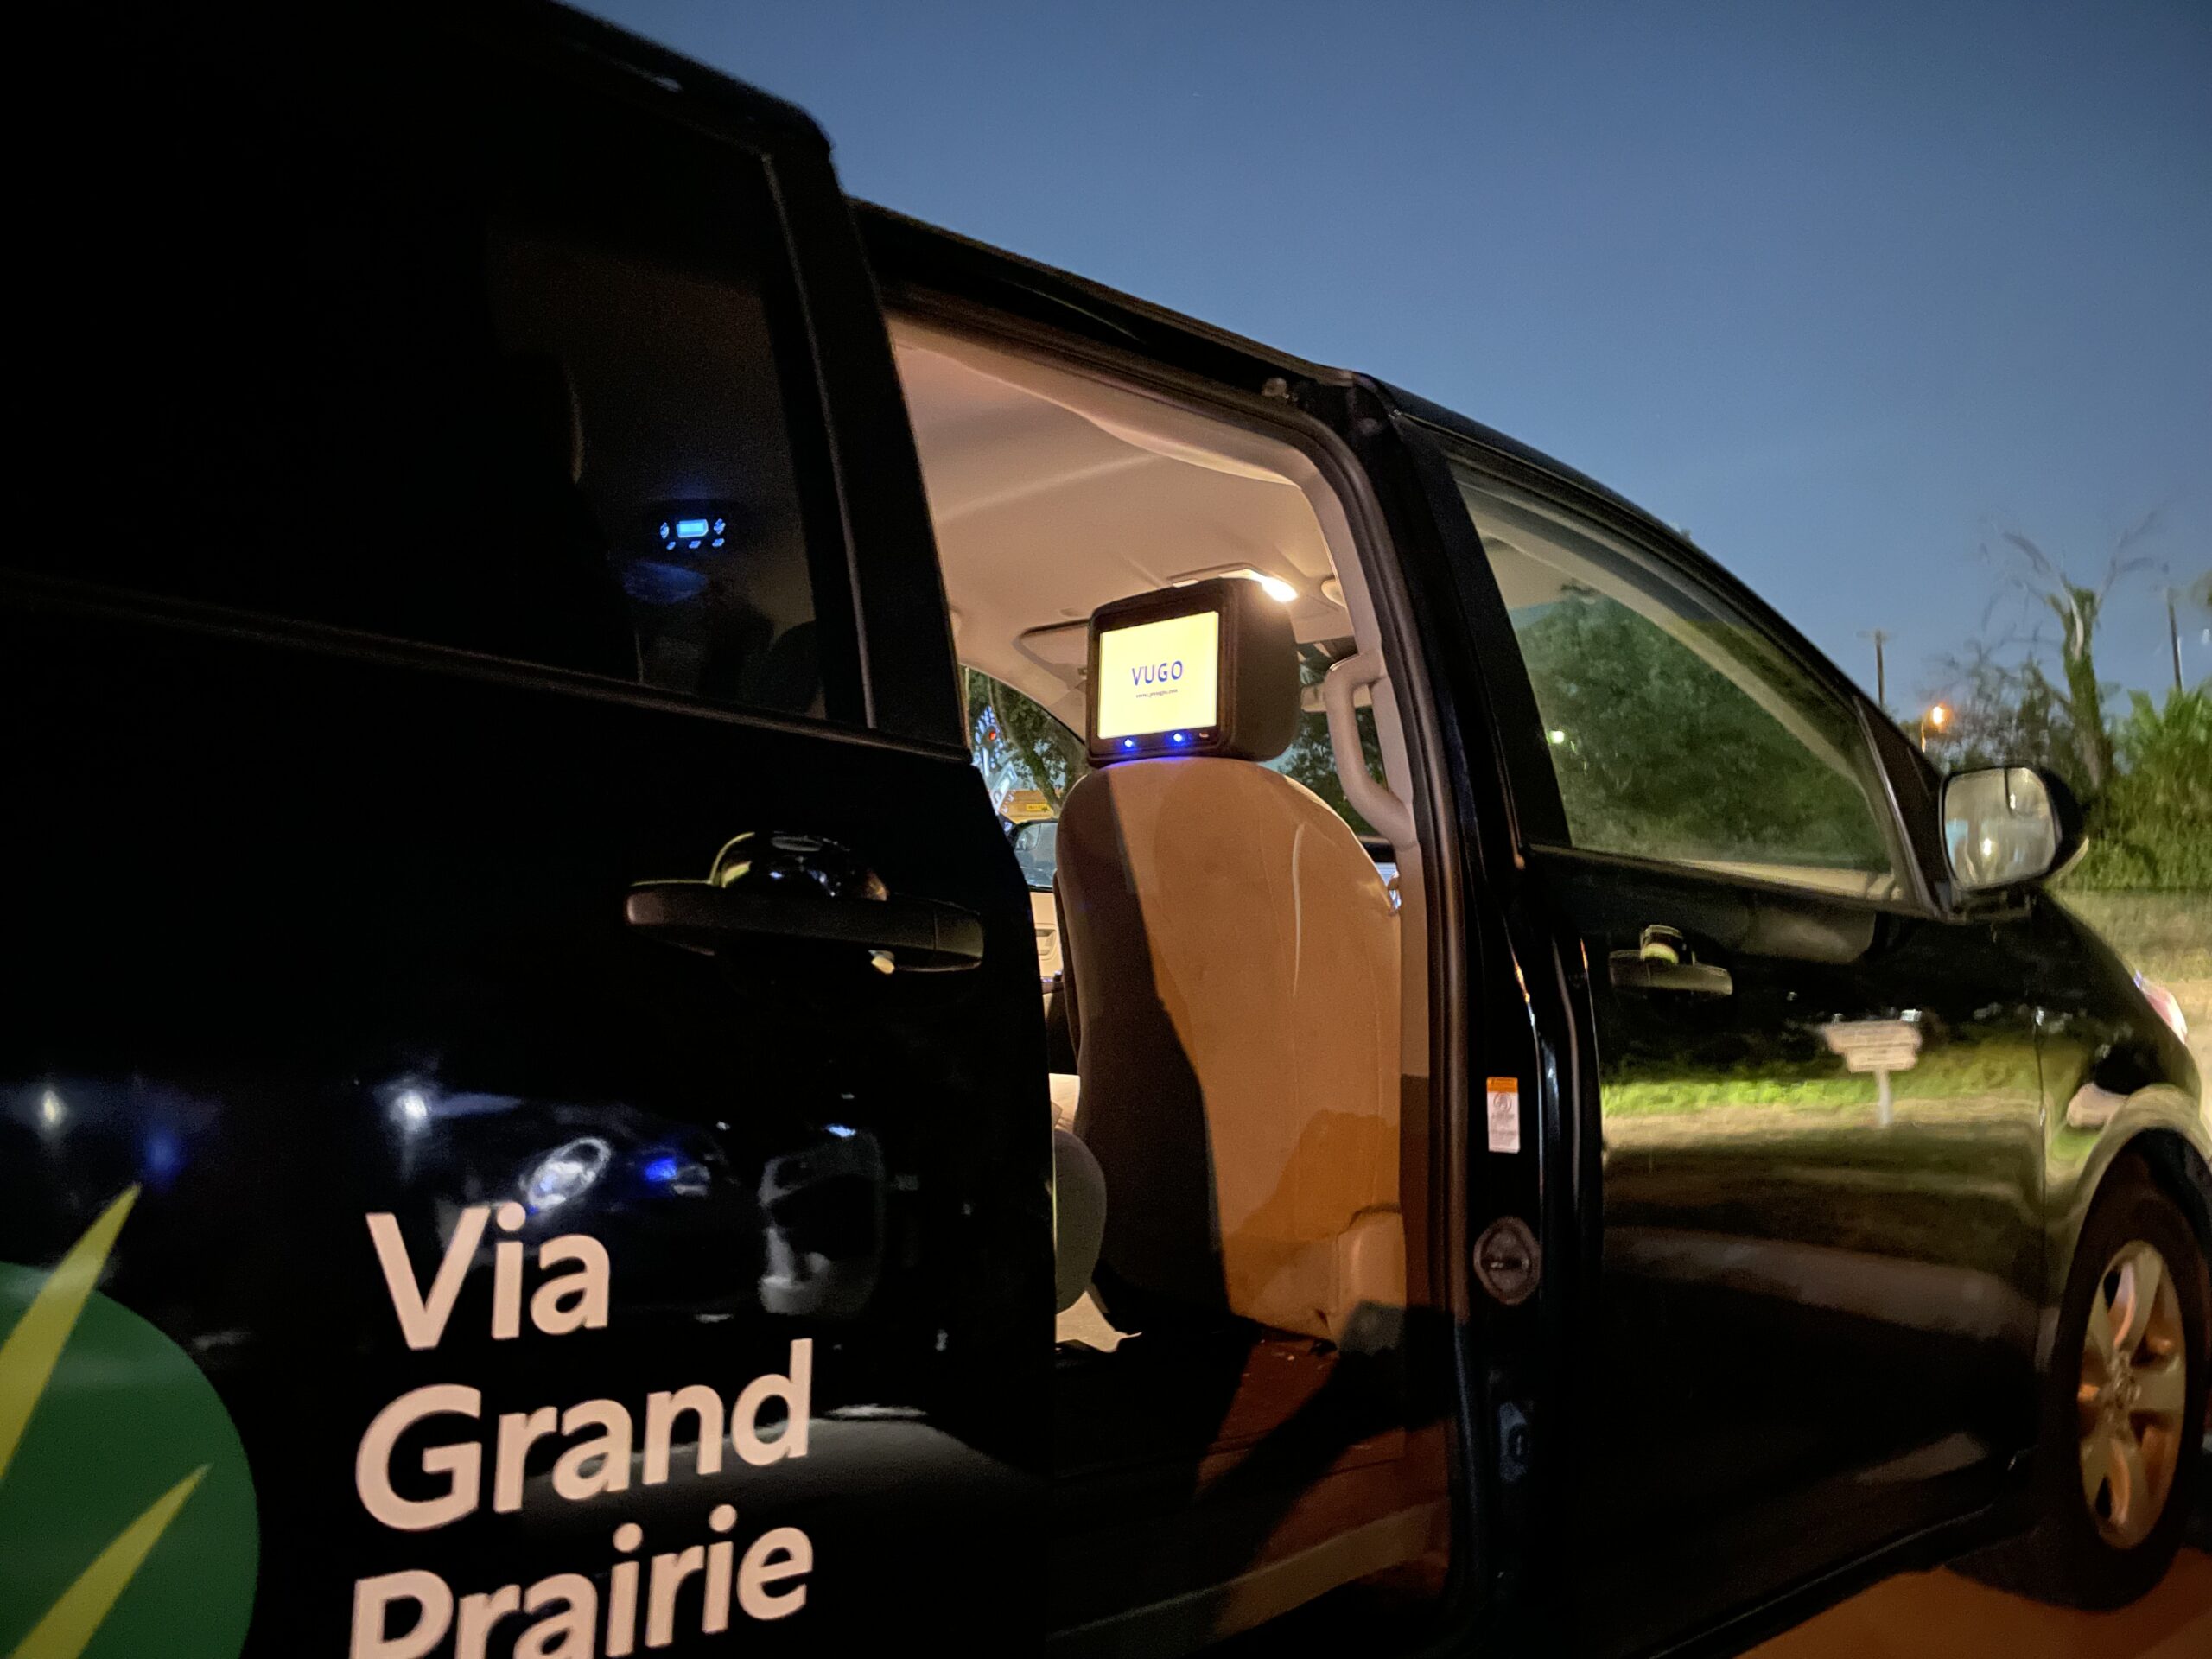 Vugo and Via expand in-vehicle passenger experience in Texas to Fort Worth and Grand Prairie